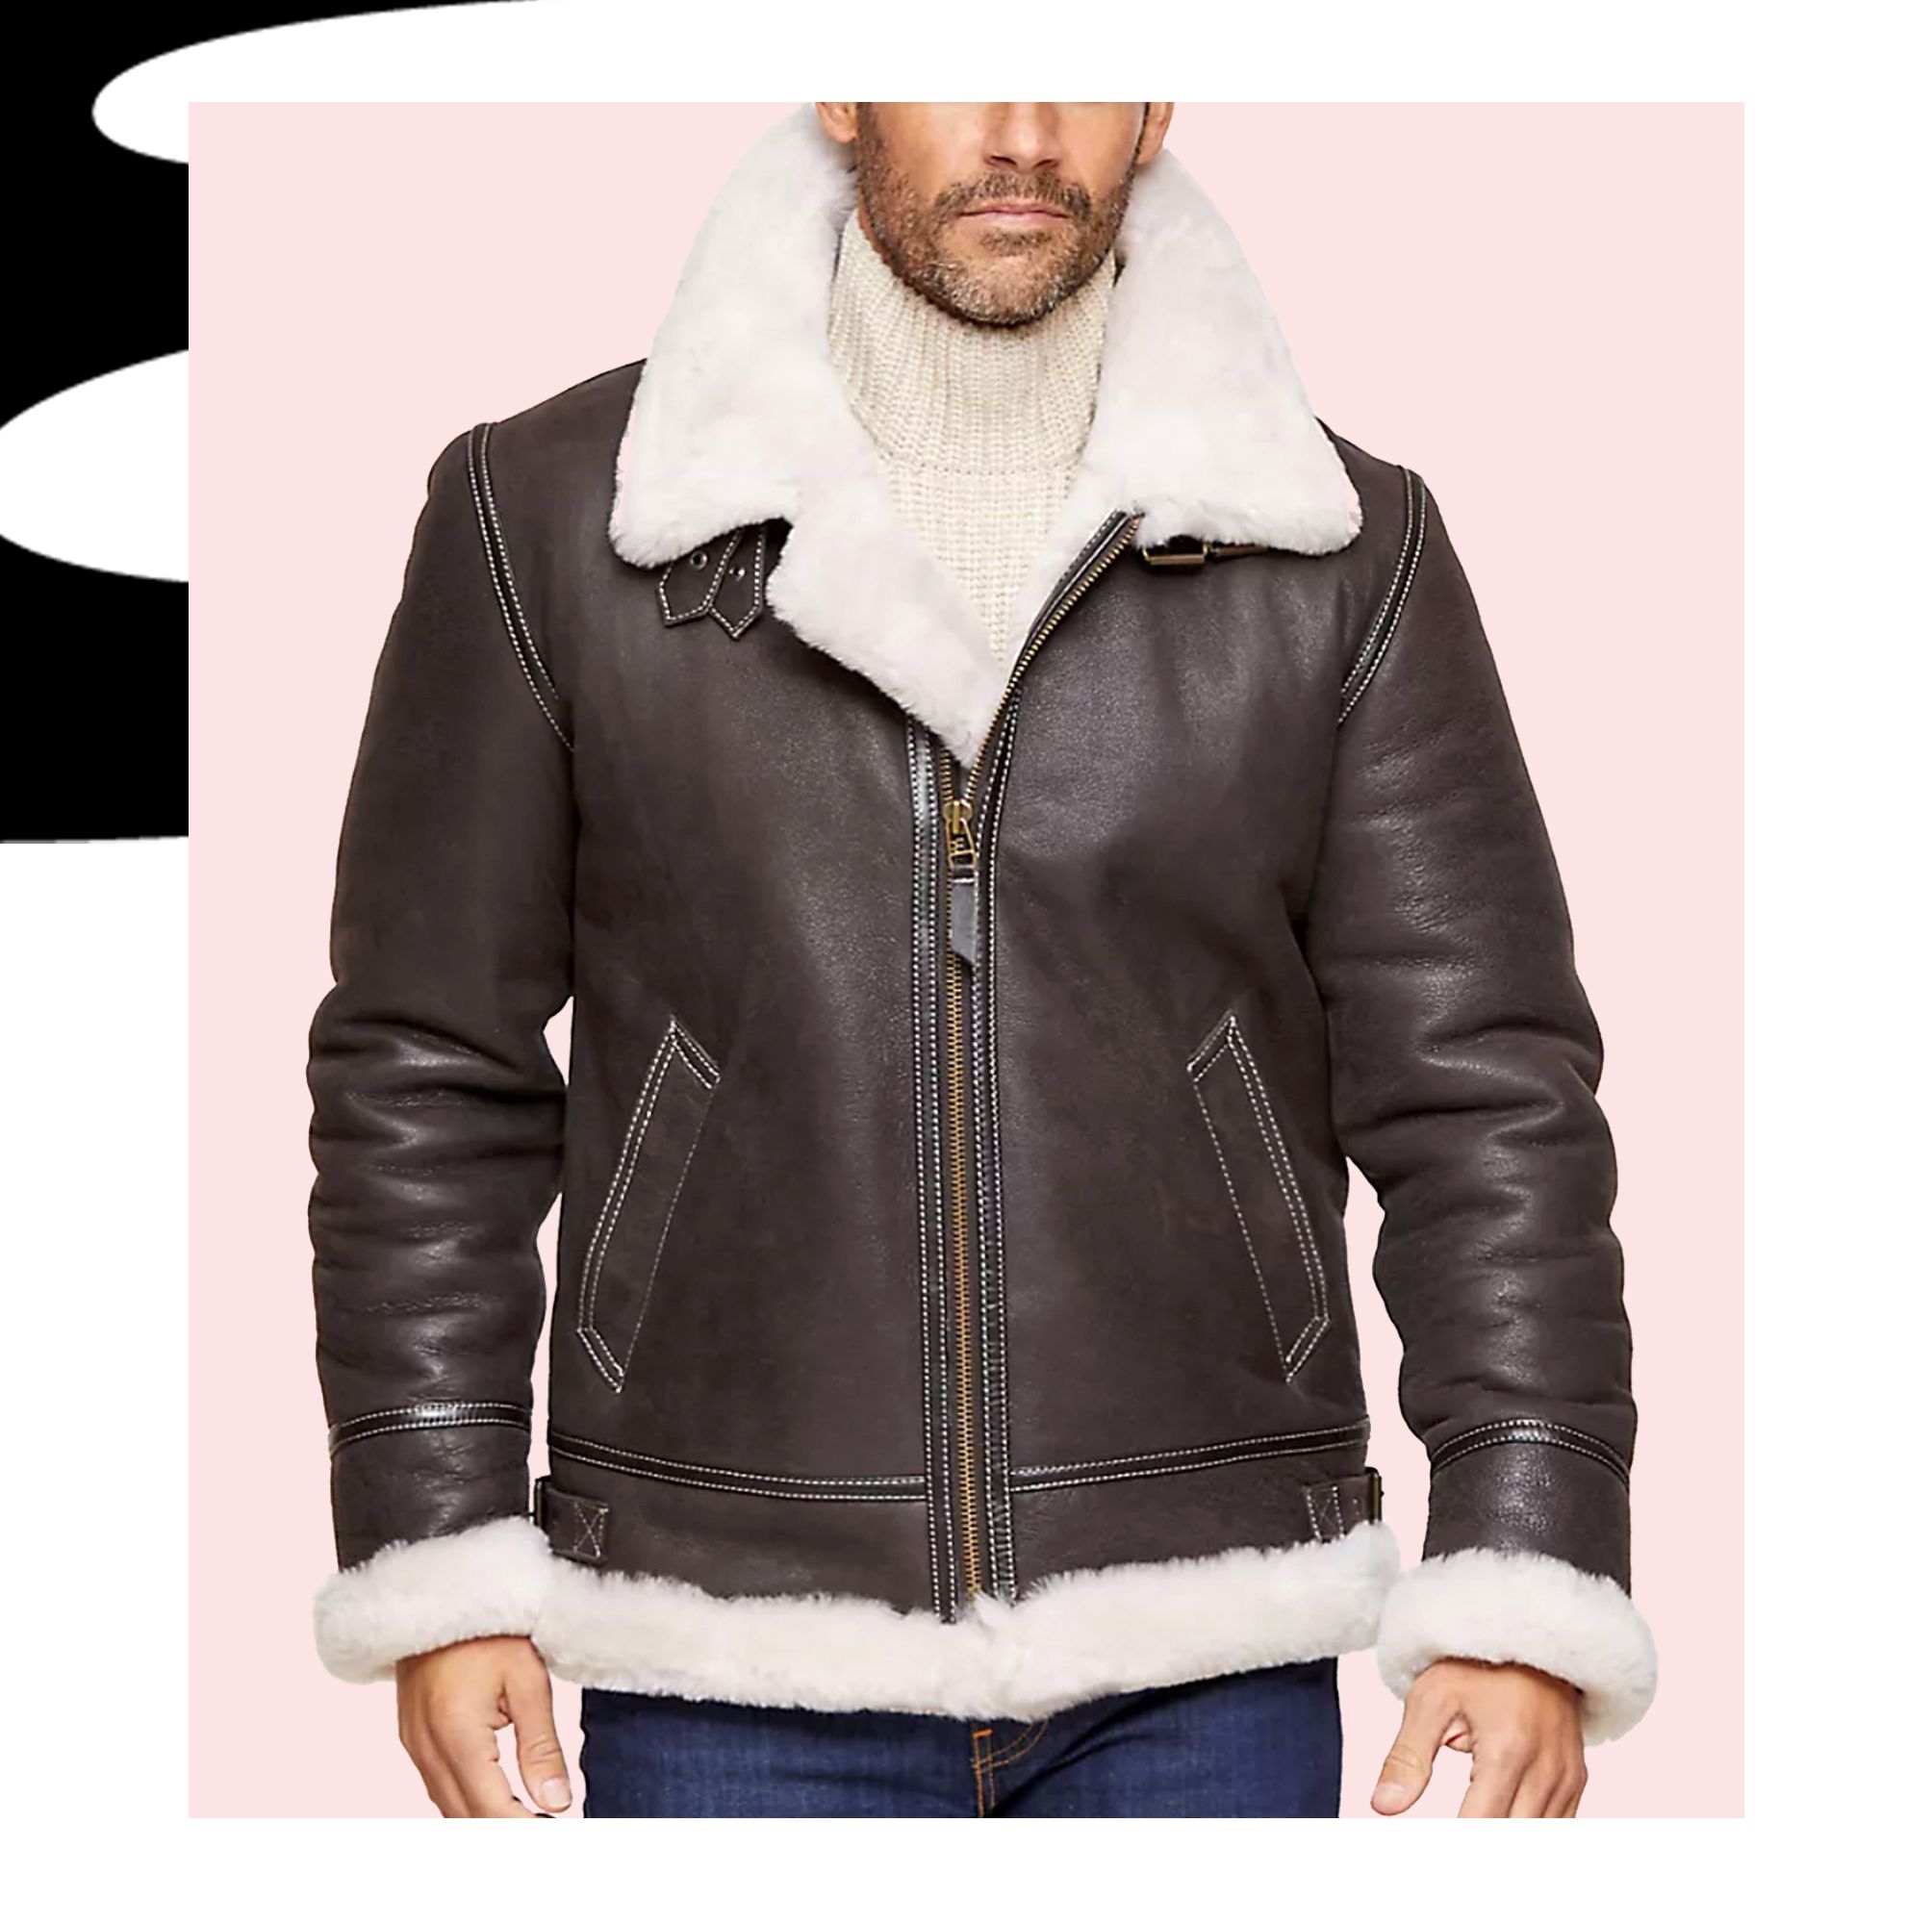 The Best Shearling Jackets Are Worth the Investment